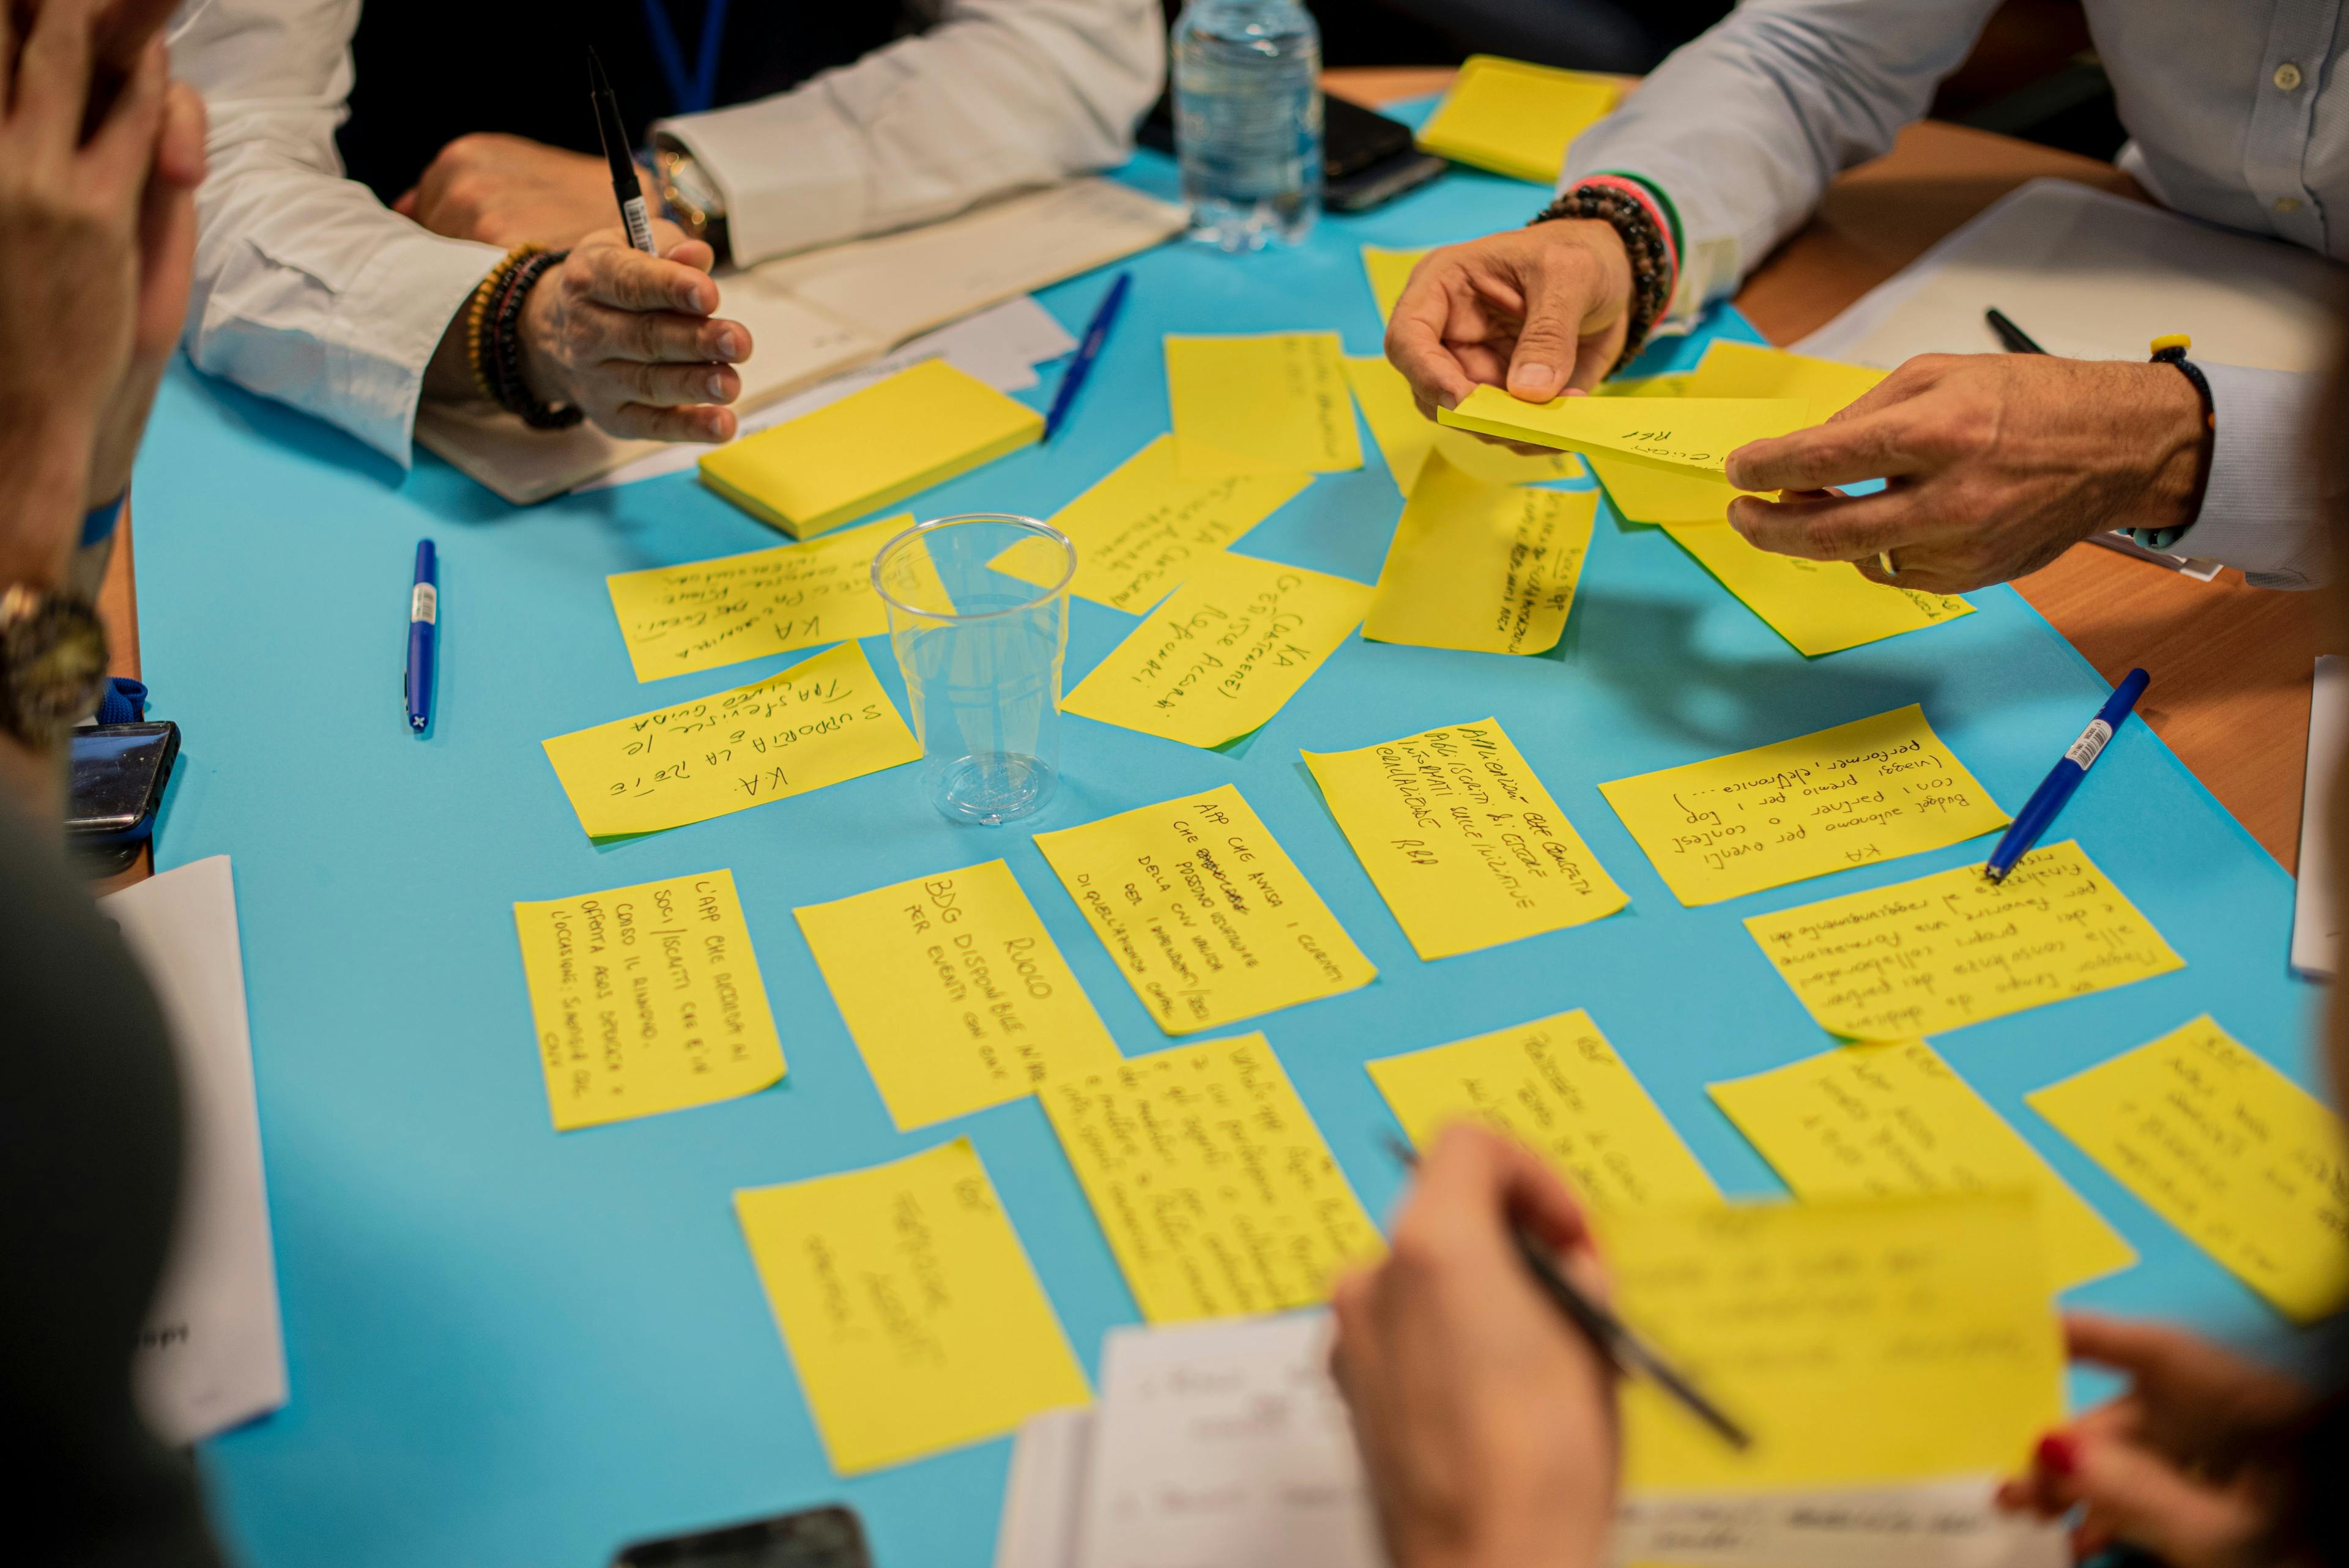 Sticky notes for collaborative workshops